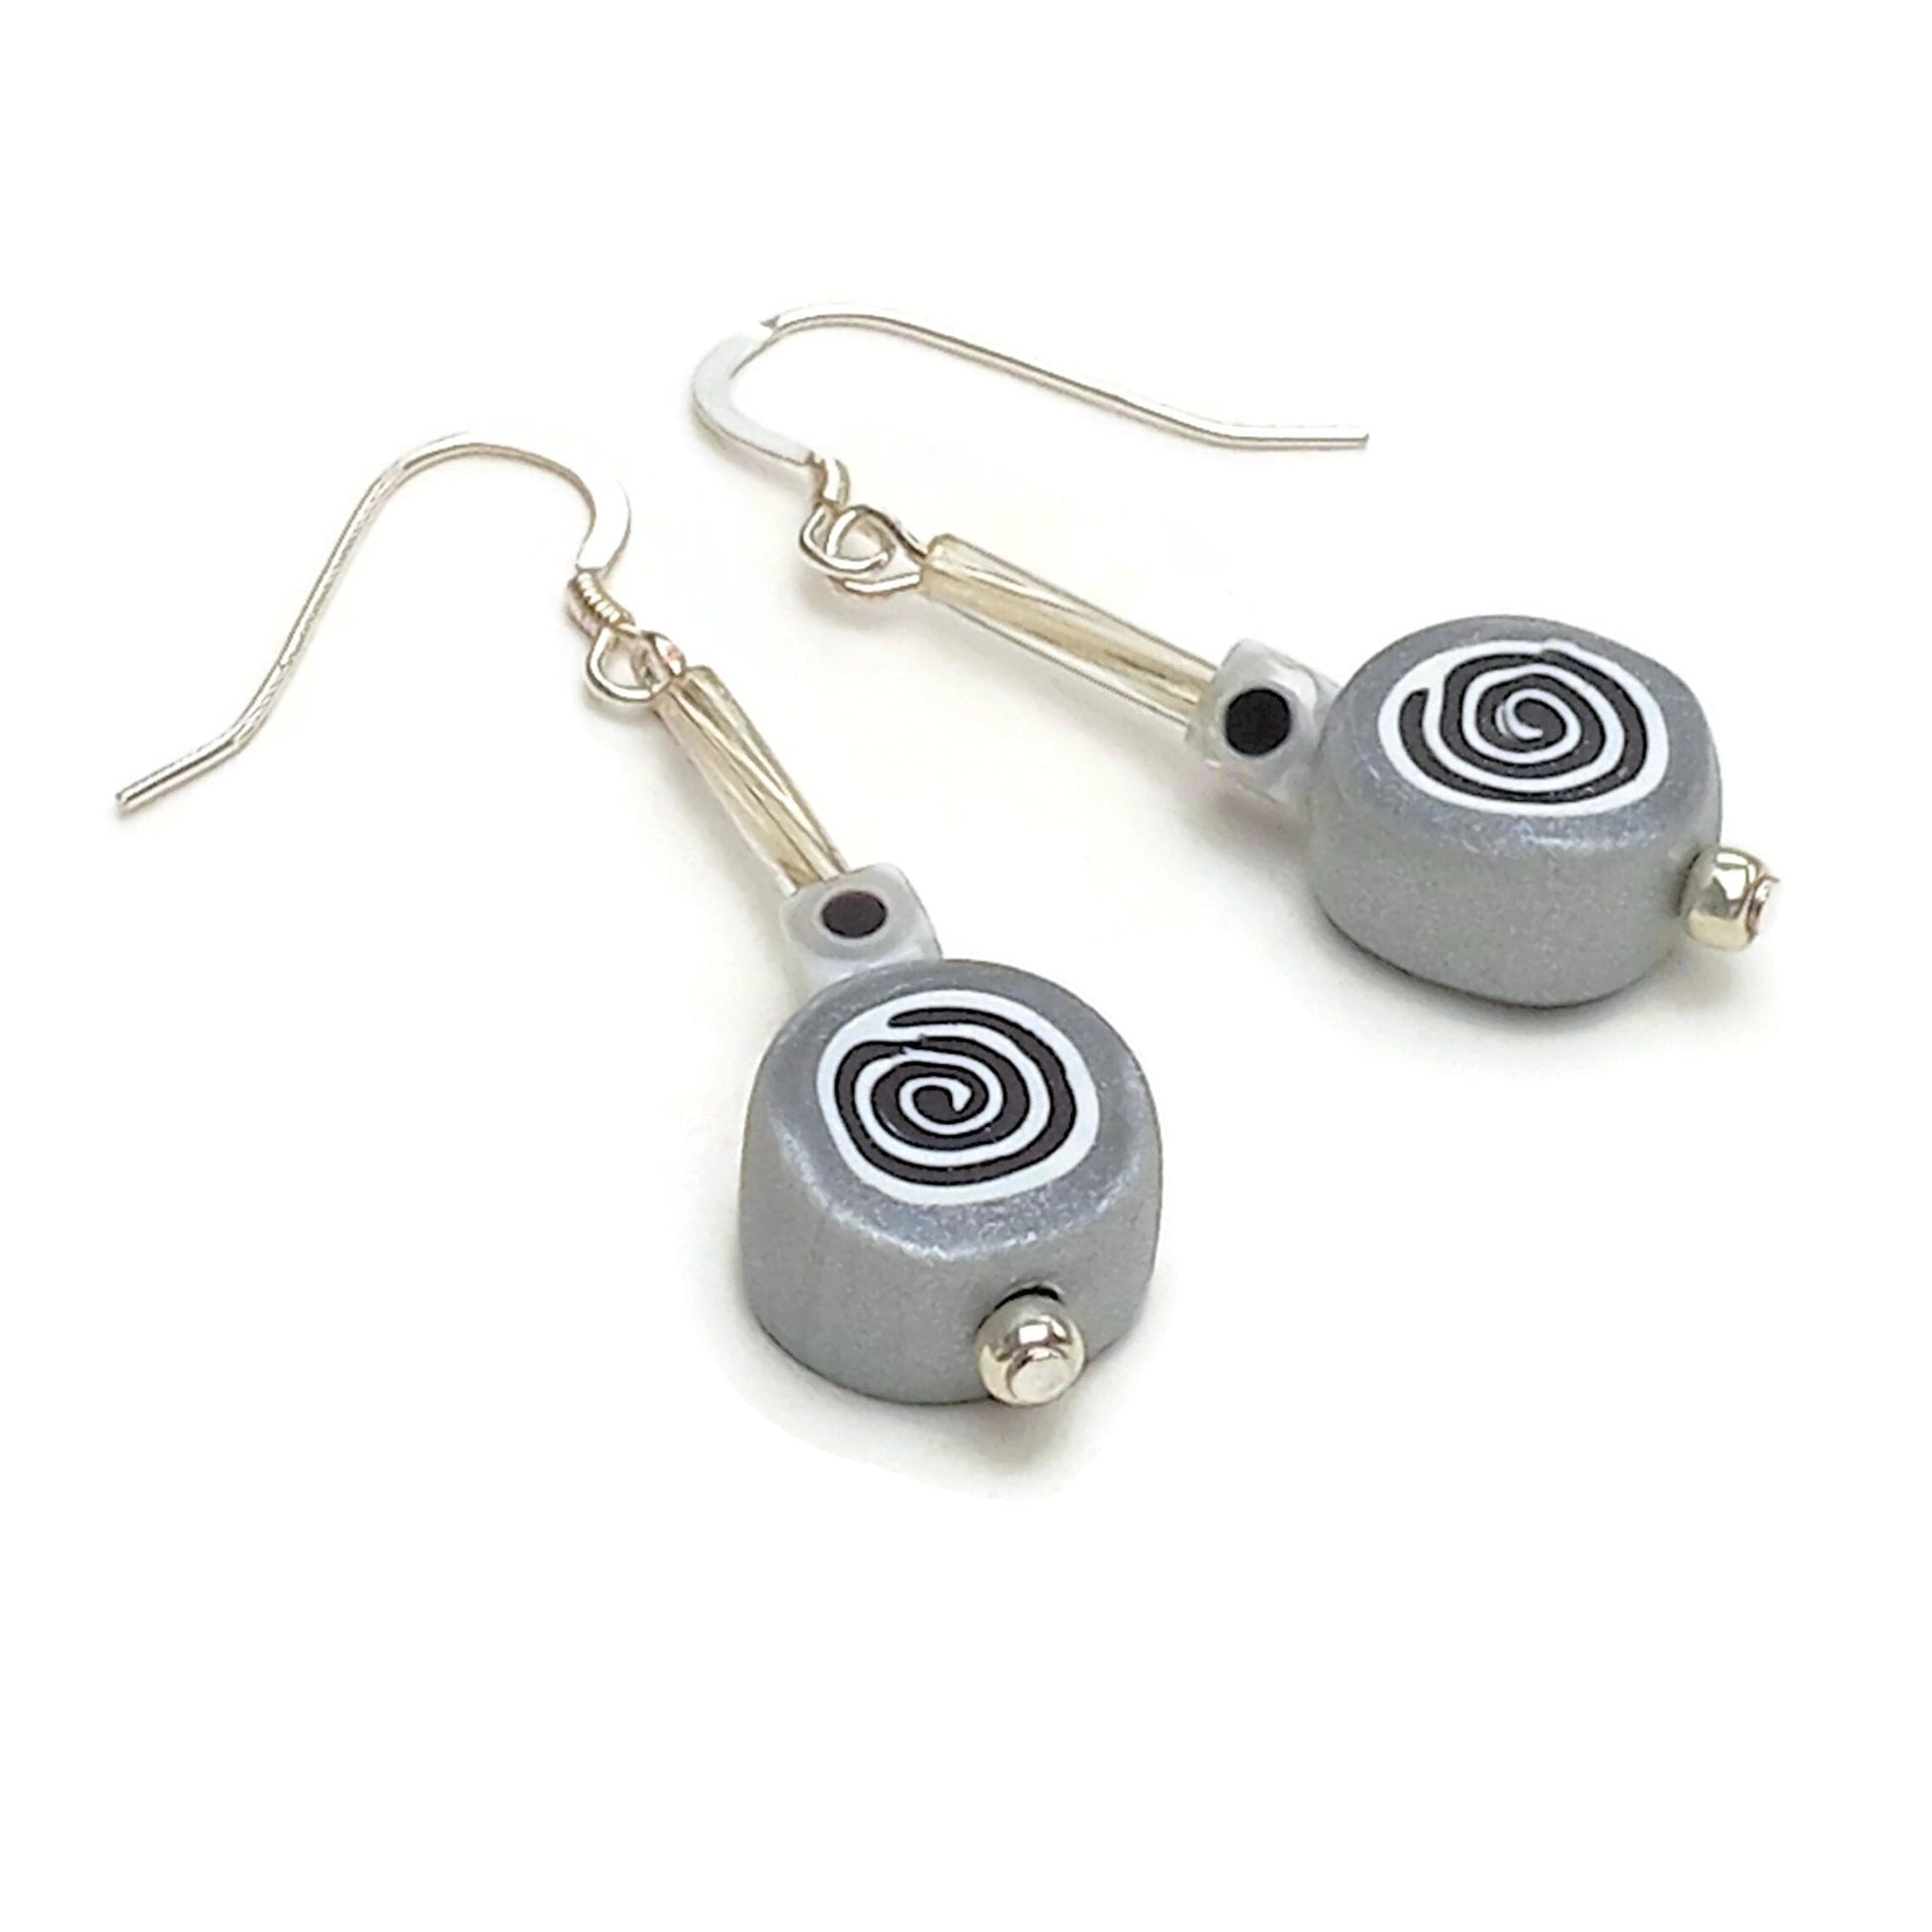 Polymer clay spiral bead drop earrings with sterling silver ear wires on white background